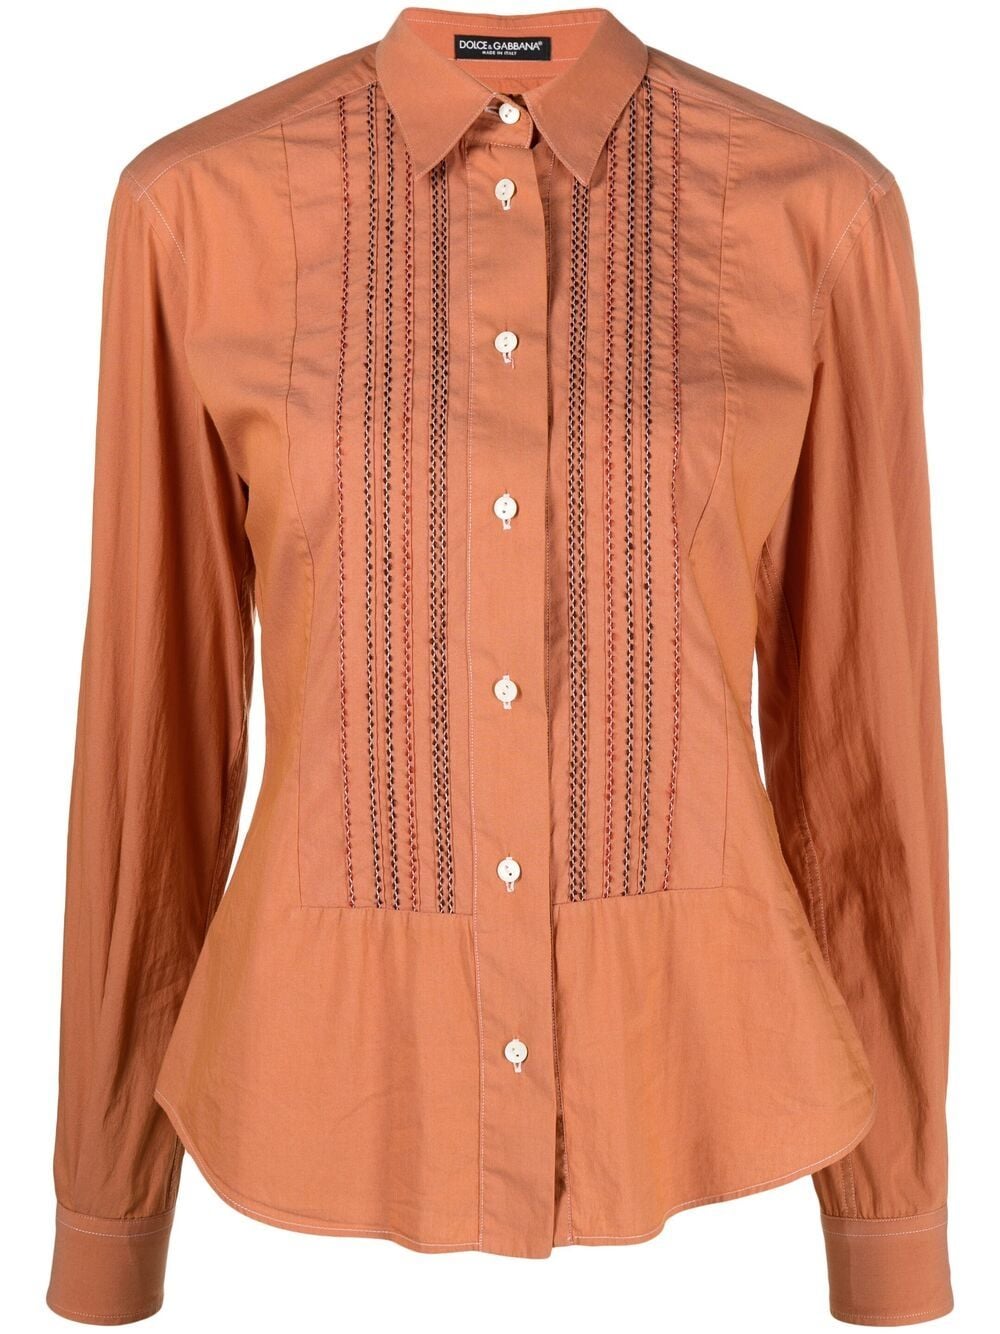 Dolce & Gabbana Pre-Owned 2000s contrast stitching shirt - Orange von Dolce & Gabbana Pre-Owned